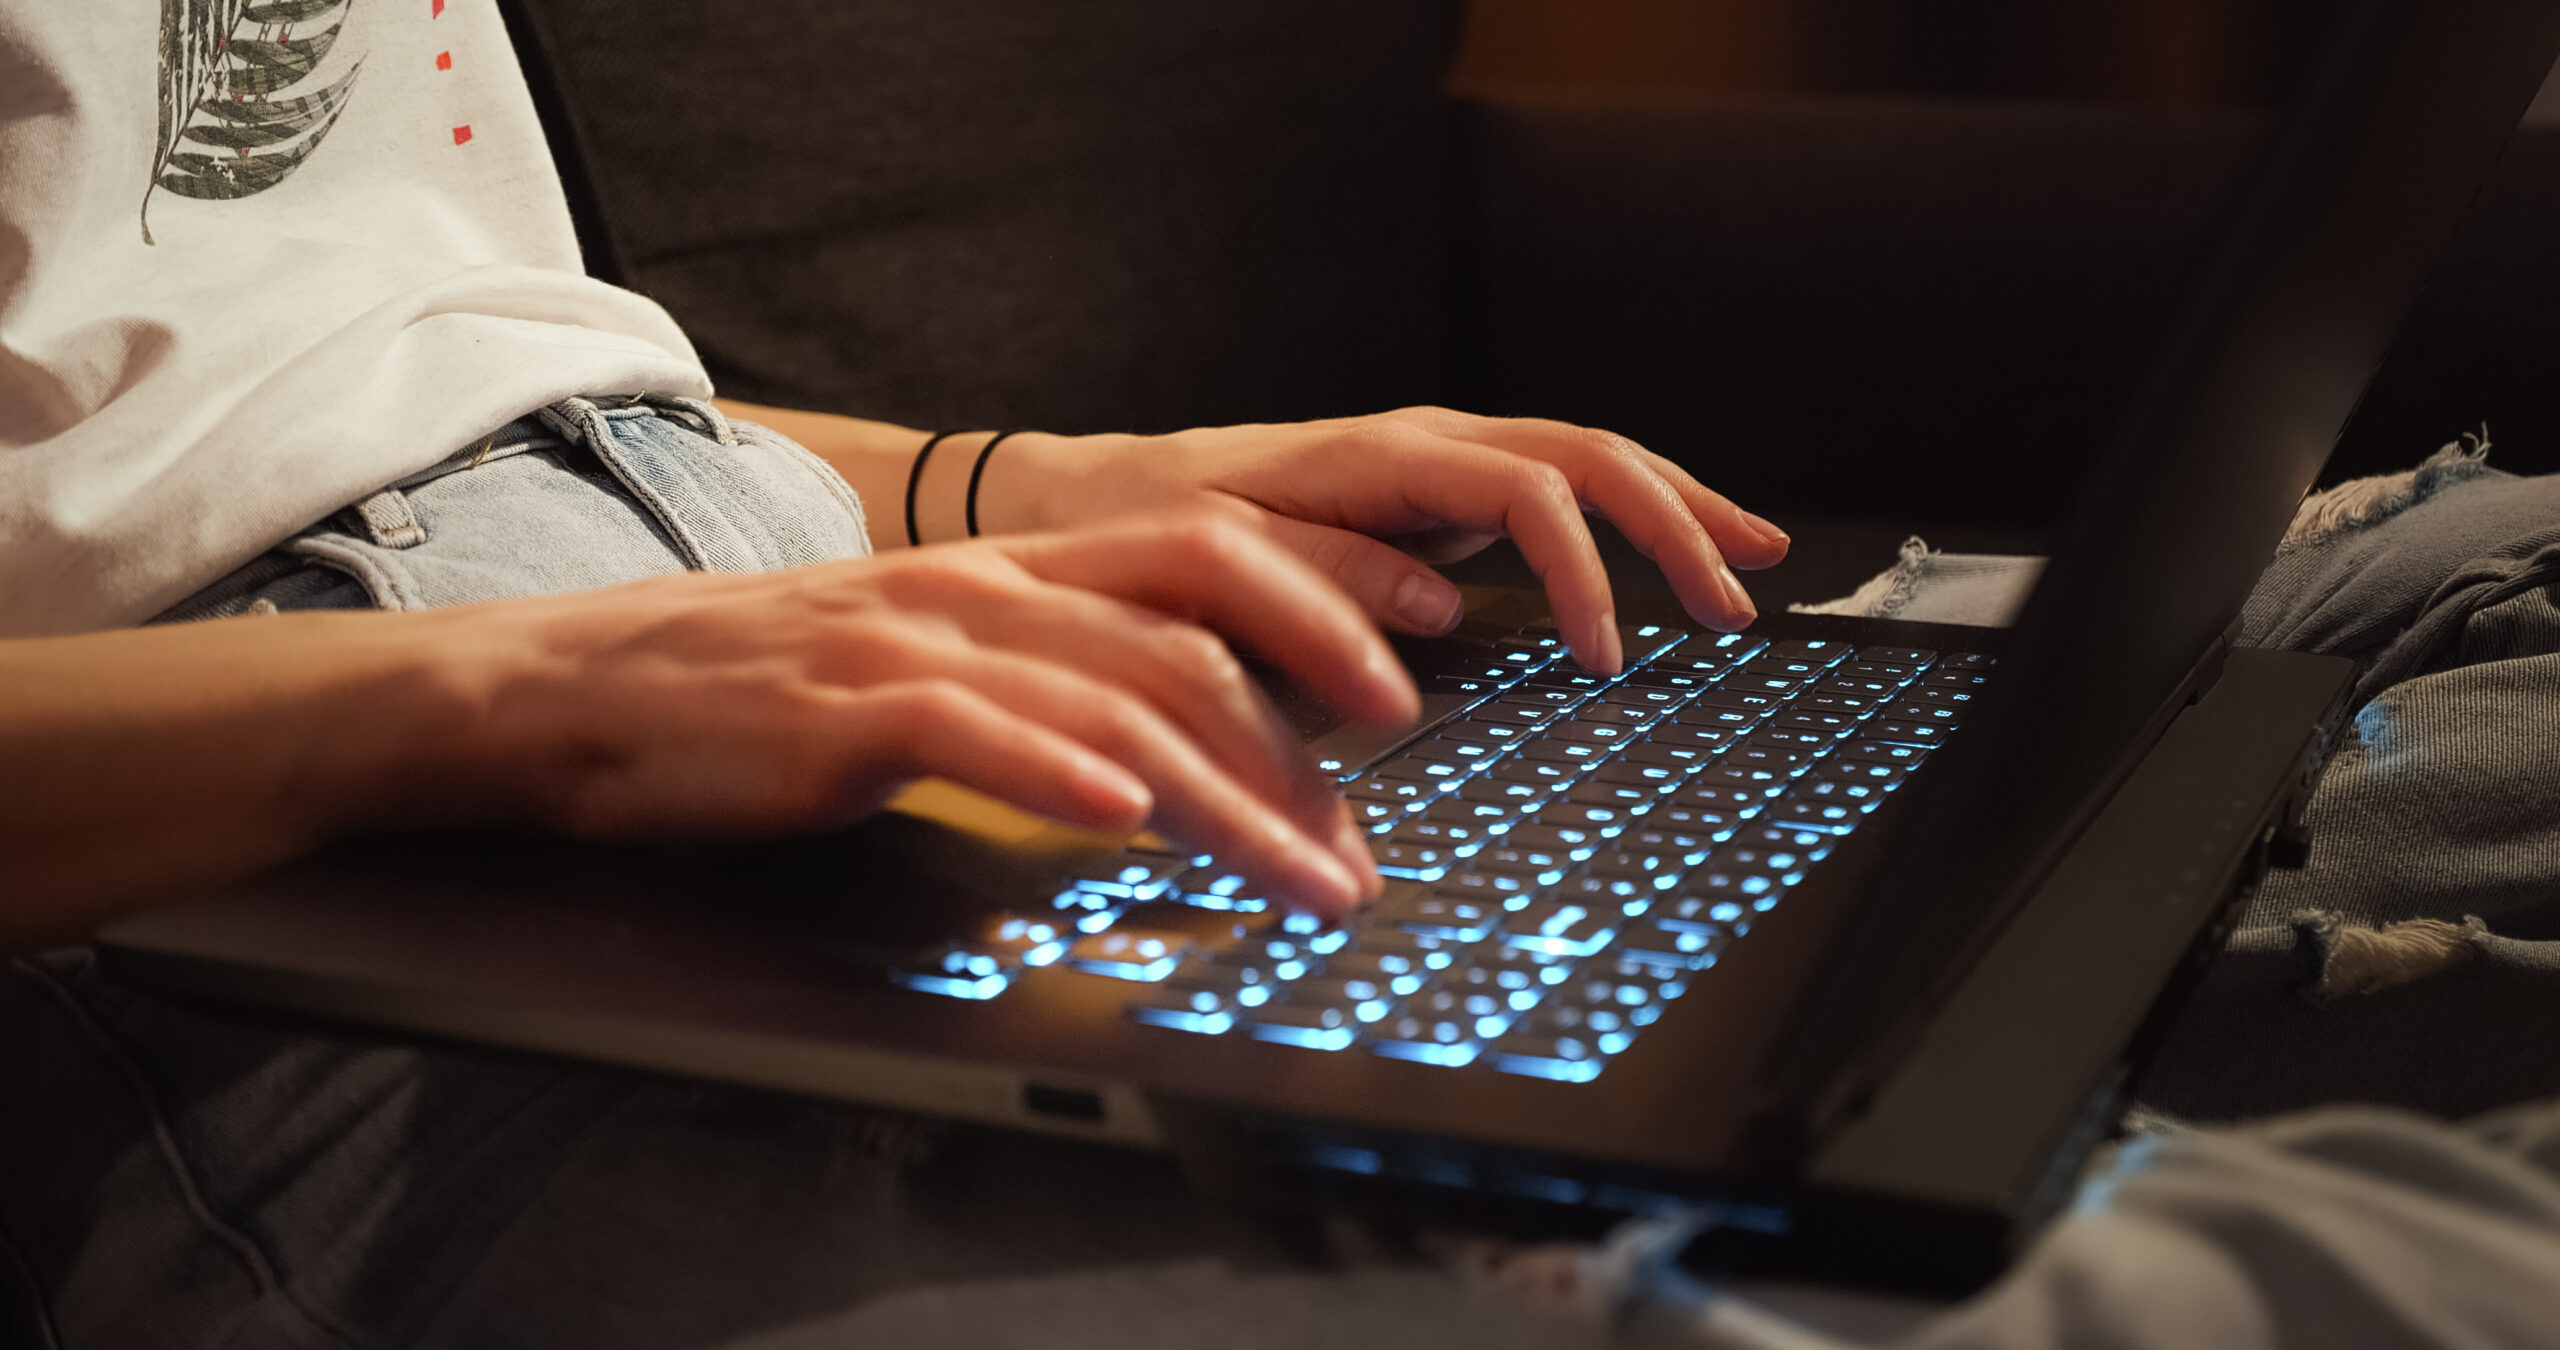 female hands typing on laptop keyboard with backlighting